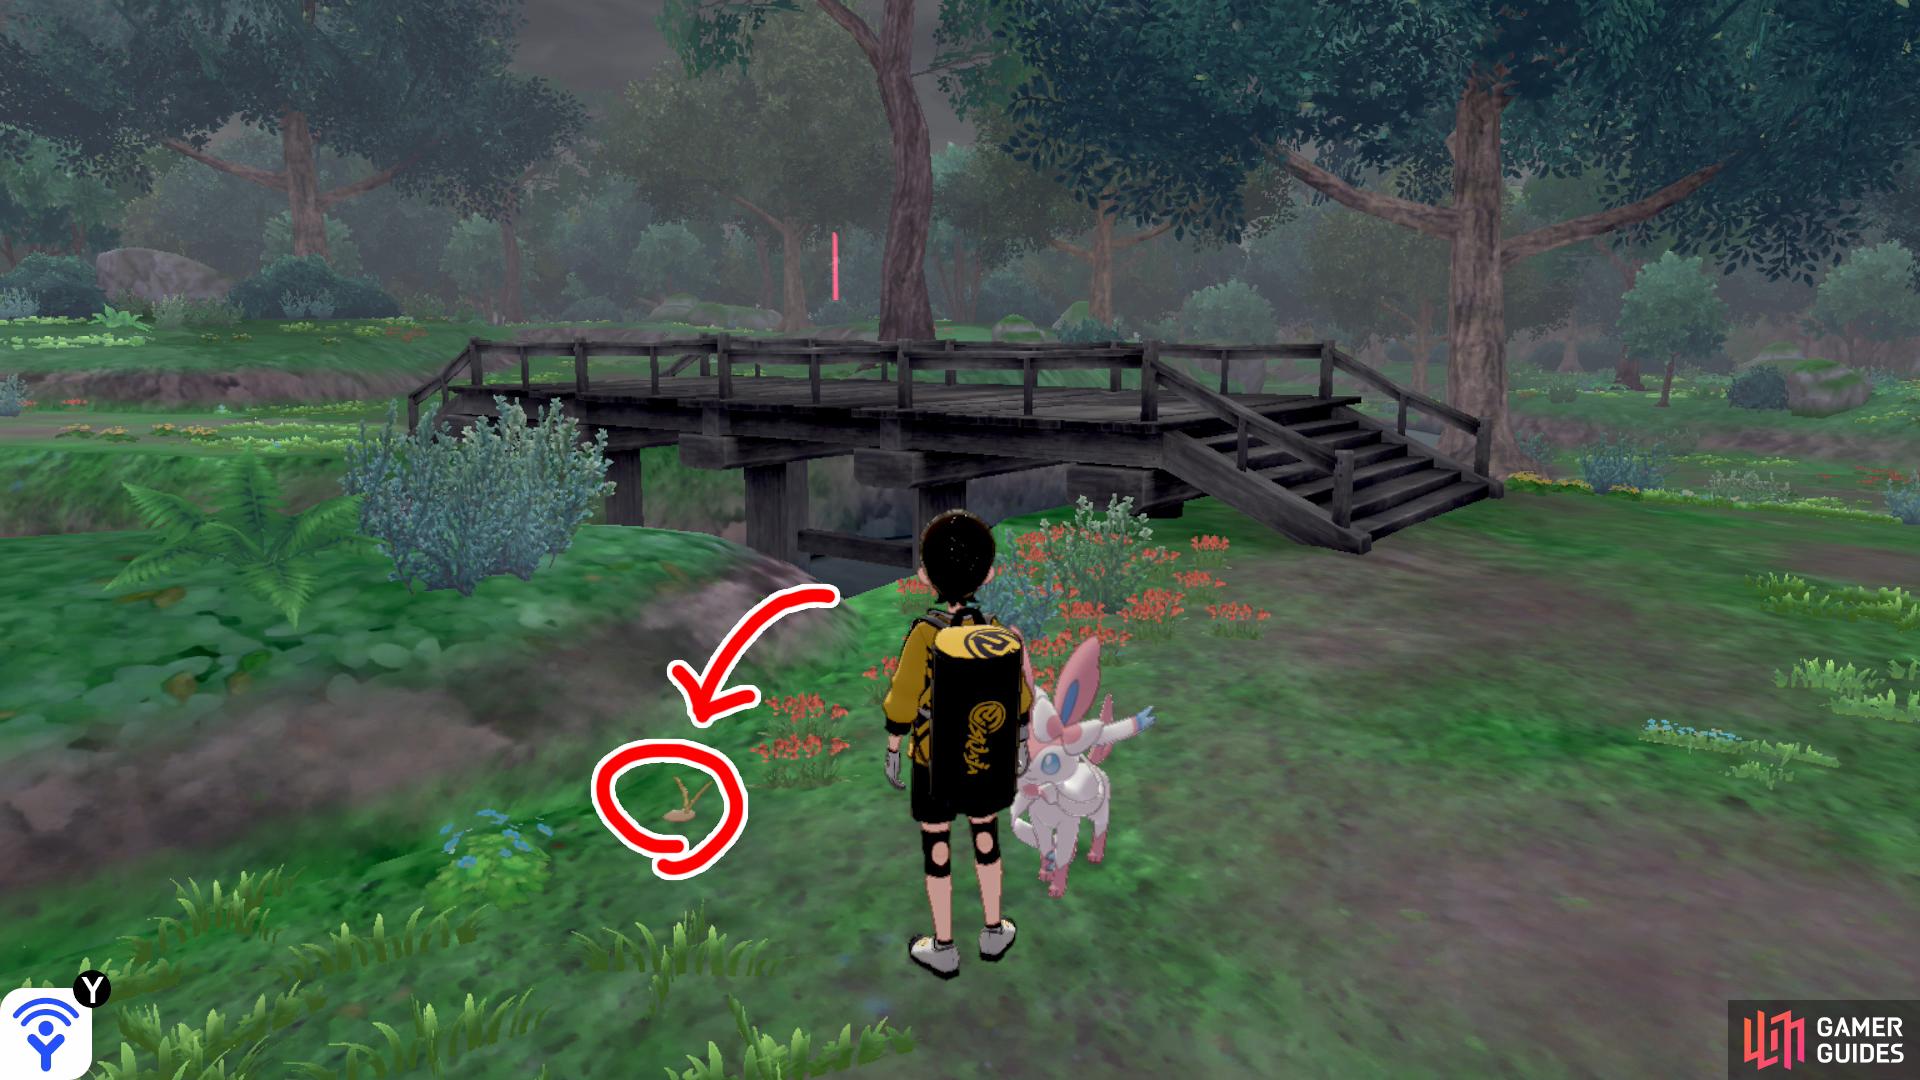 3/8: From Diglett 3, keep on following the forest until you reach the second bridge. Cross the bridge and turn right. It's hiding after the red flowers near the river.